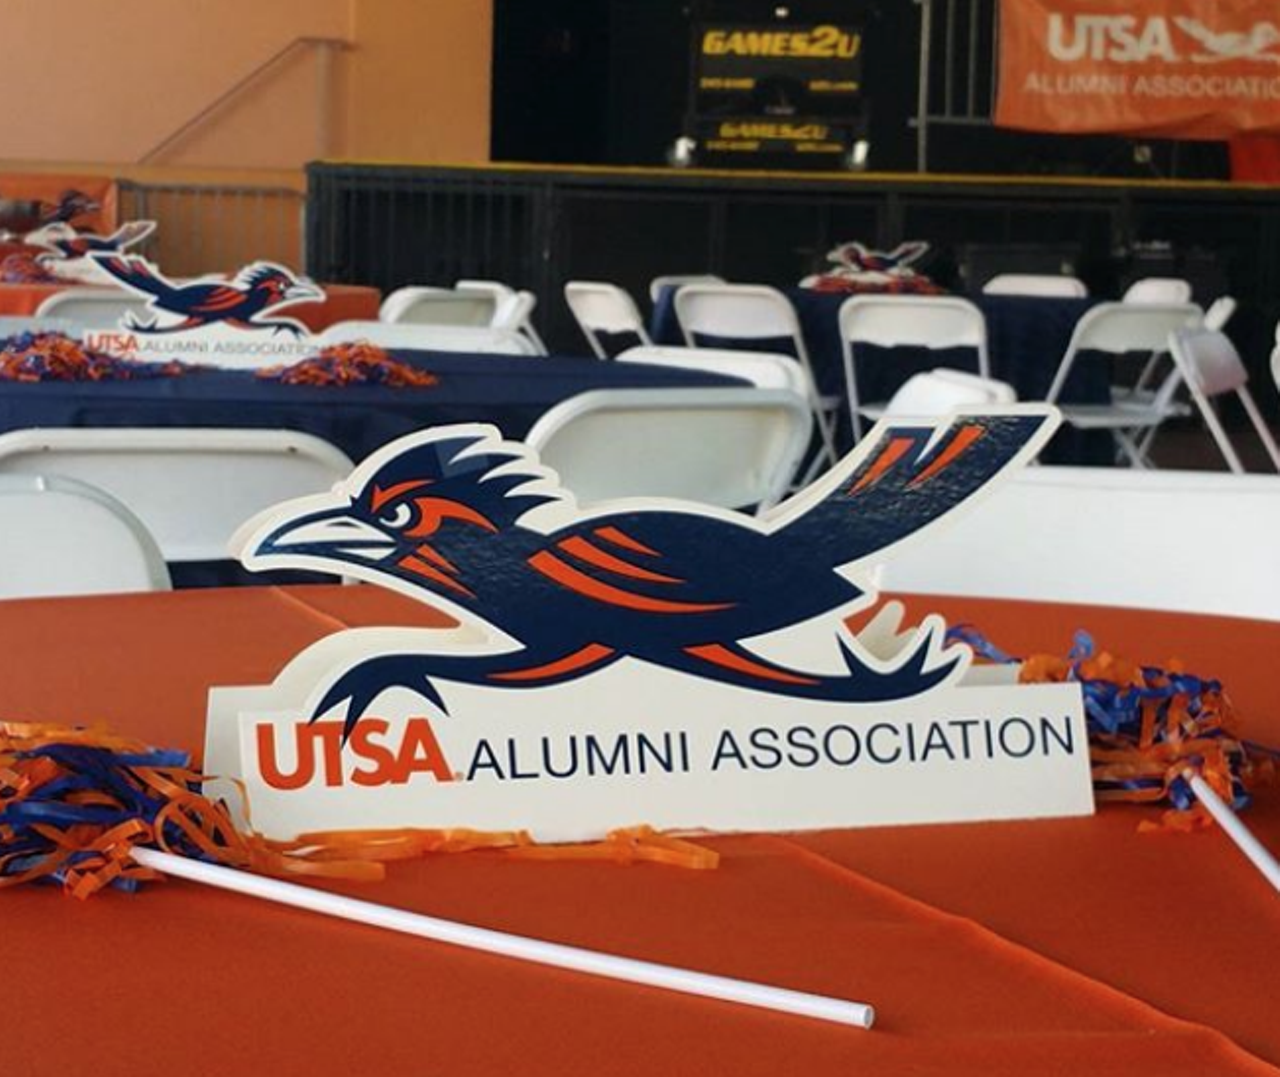 The Alumni Association won’t leave you alone
When they give you your free year of being in the UTSA Alumni Association when you graduate, you’d be crazy not to join — especially if you graduate without having a job lined up. Just be prepared for the students who will call you — sometimes even after business hours — to ask if you’d like to make a small donation to the university that took all your money in the first place. I’m looking at you, kid who keeps calling at like 8 p.m.
Photo via Instagram / rabidmeerkat